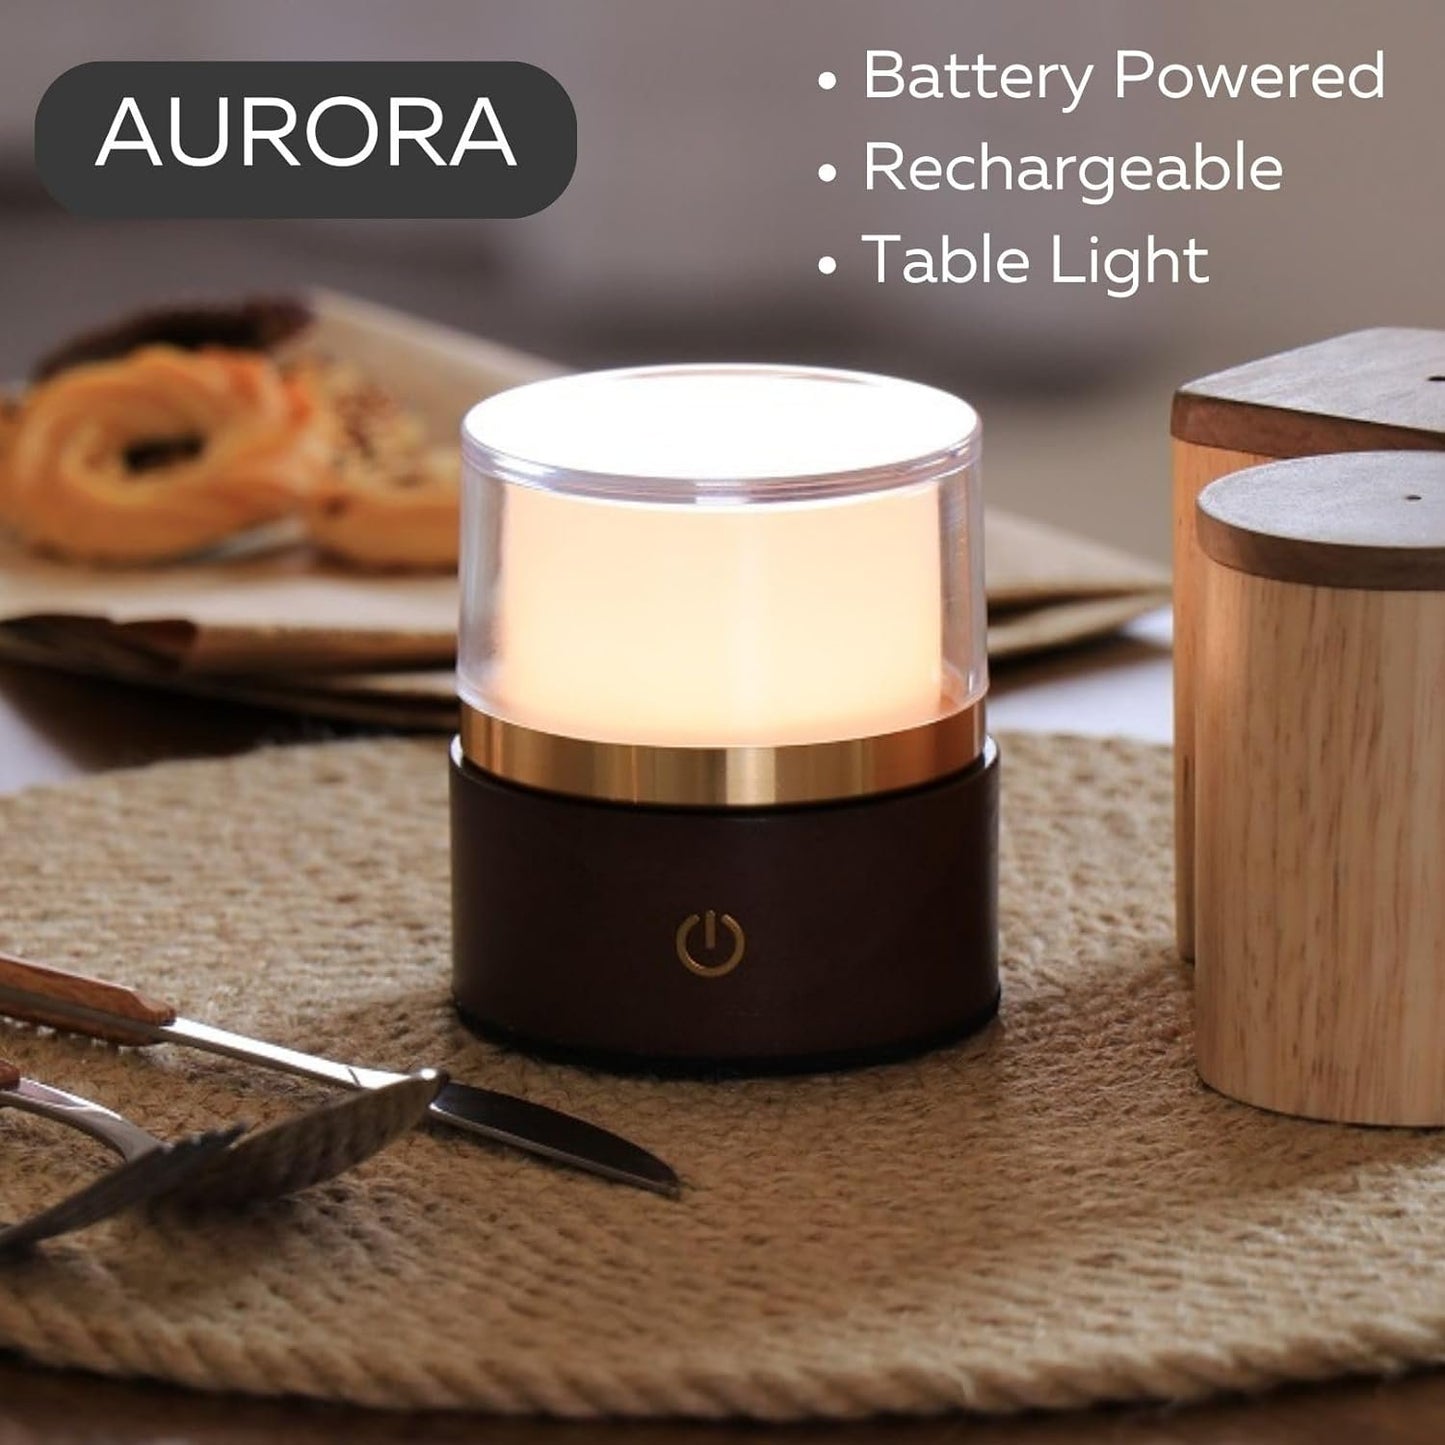 Aurora Battery Powered Lamp, Rechargeable Cordless Table Lamp for Indoor/Outdoor Dining